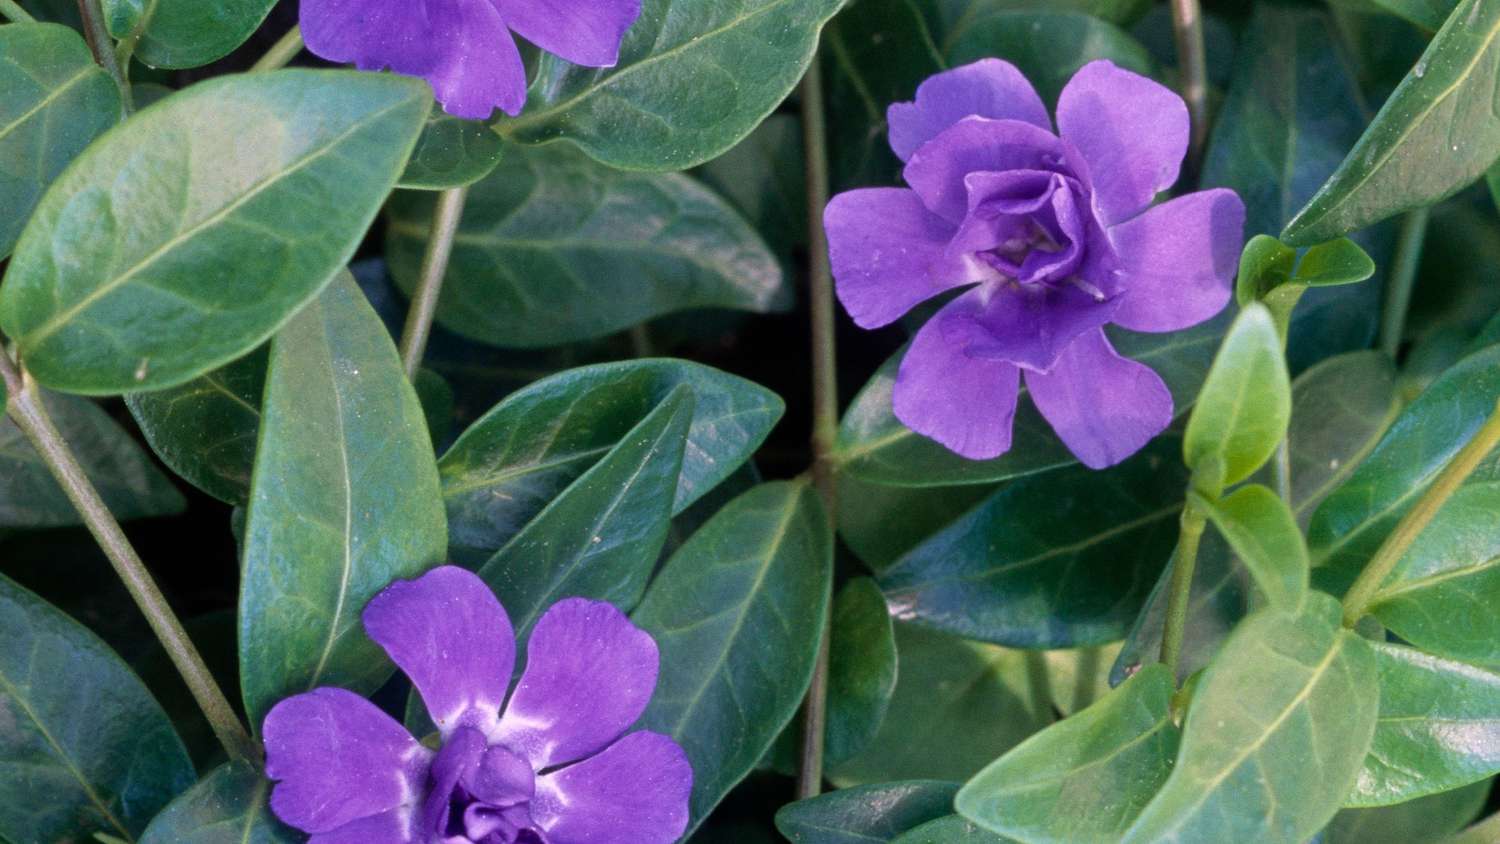 Periwinkle plant with purple flowers